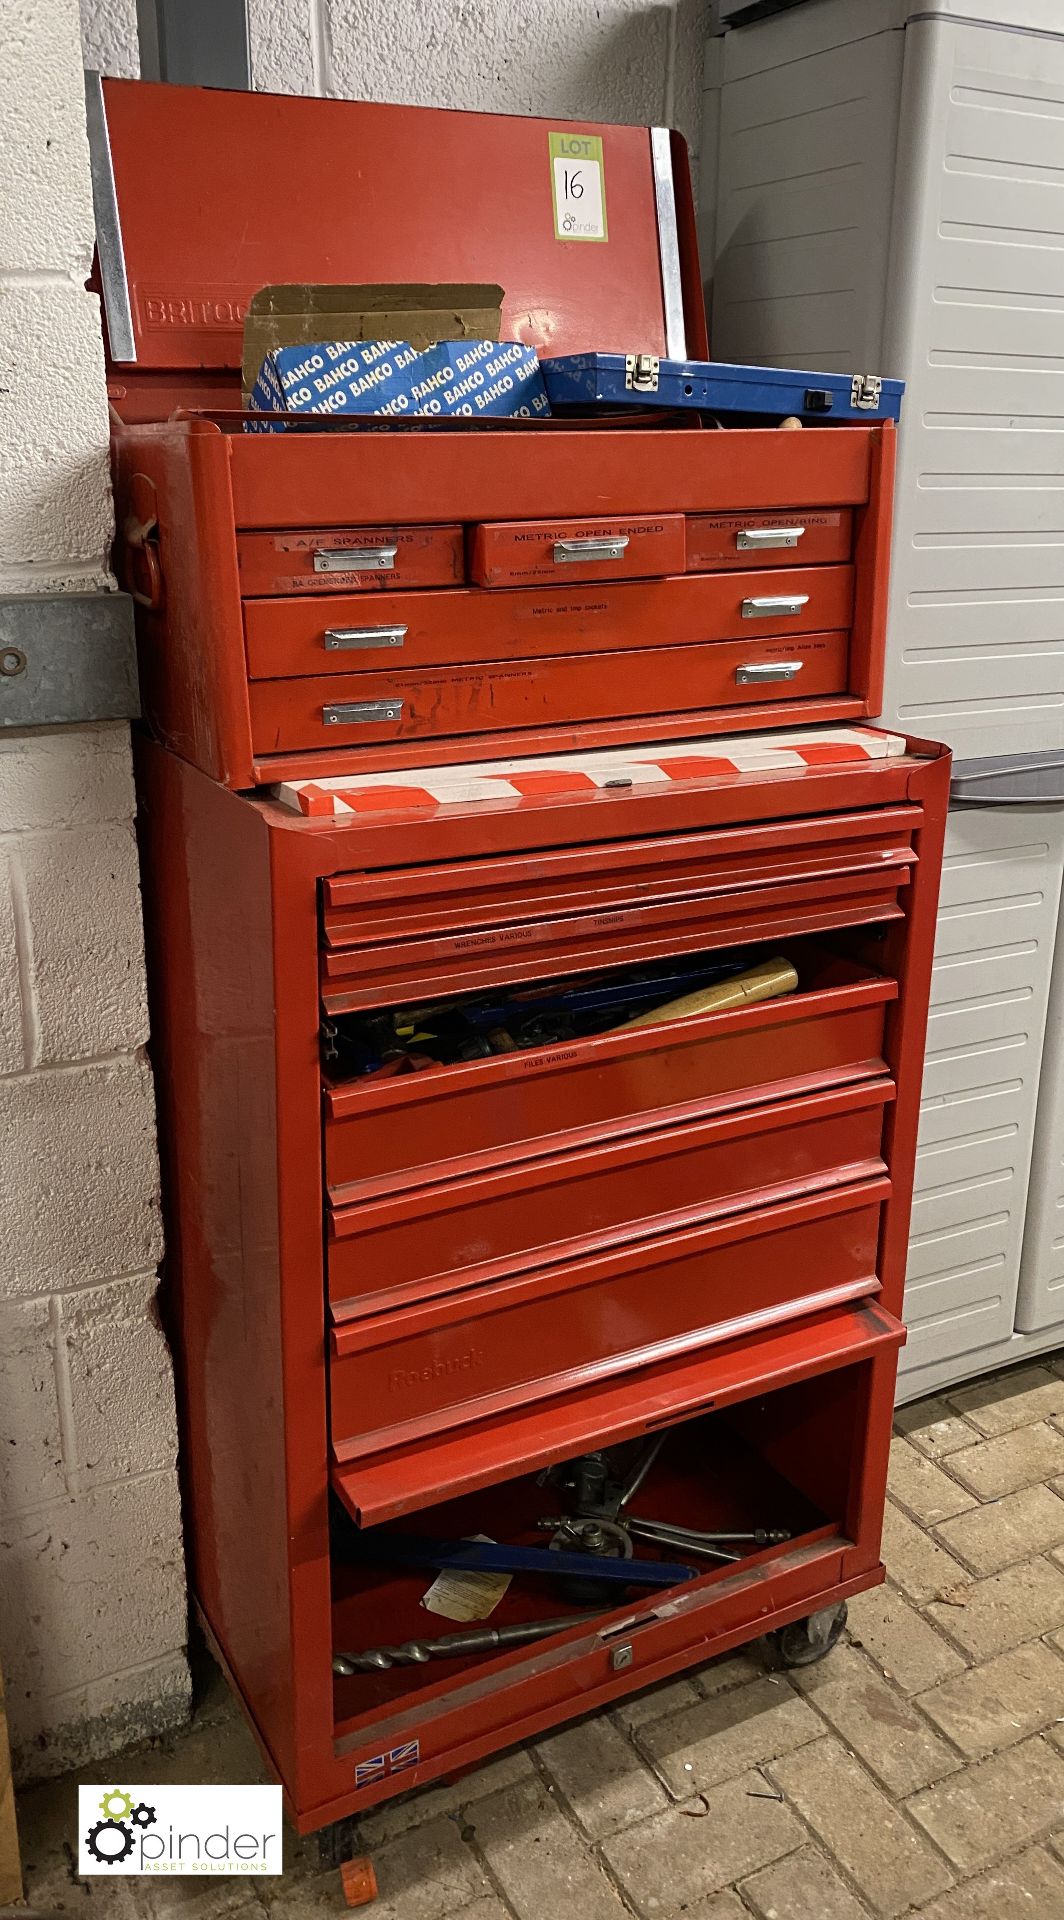 Mobile multi drawer Tool Chest, with large quantity hand tools including spanners, sockets, torque